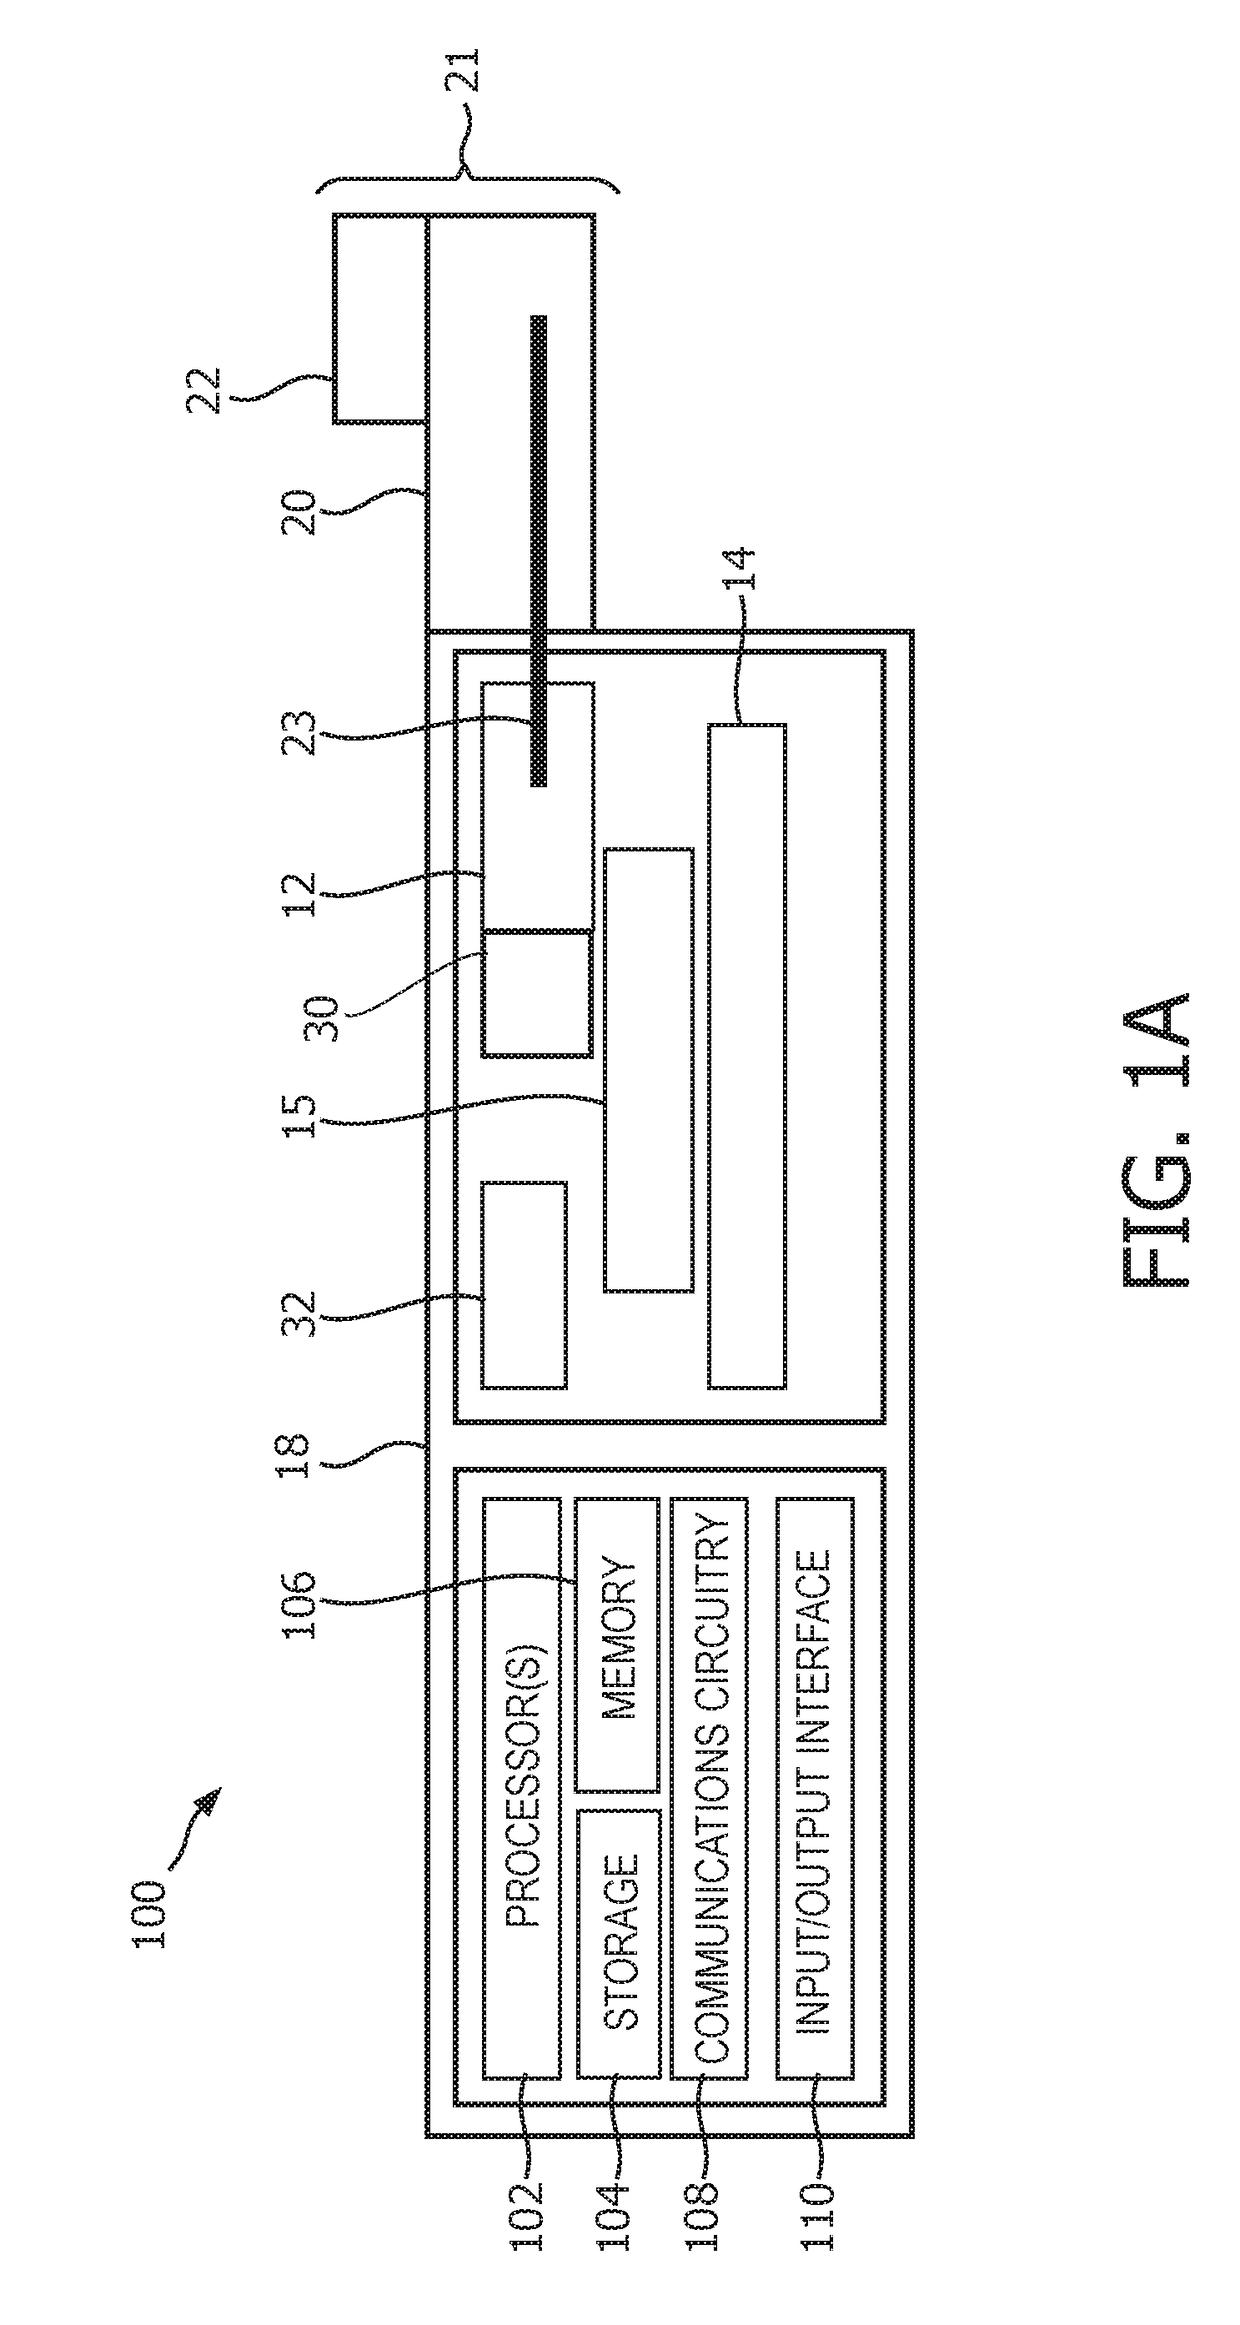 Systems, methods, and devices for providing guidance and feedback based on location and performance